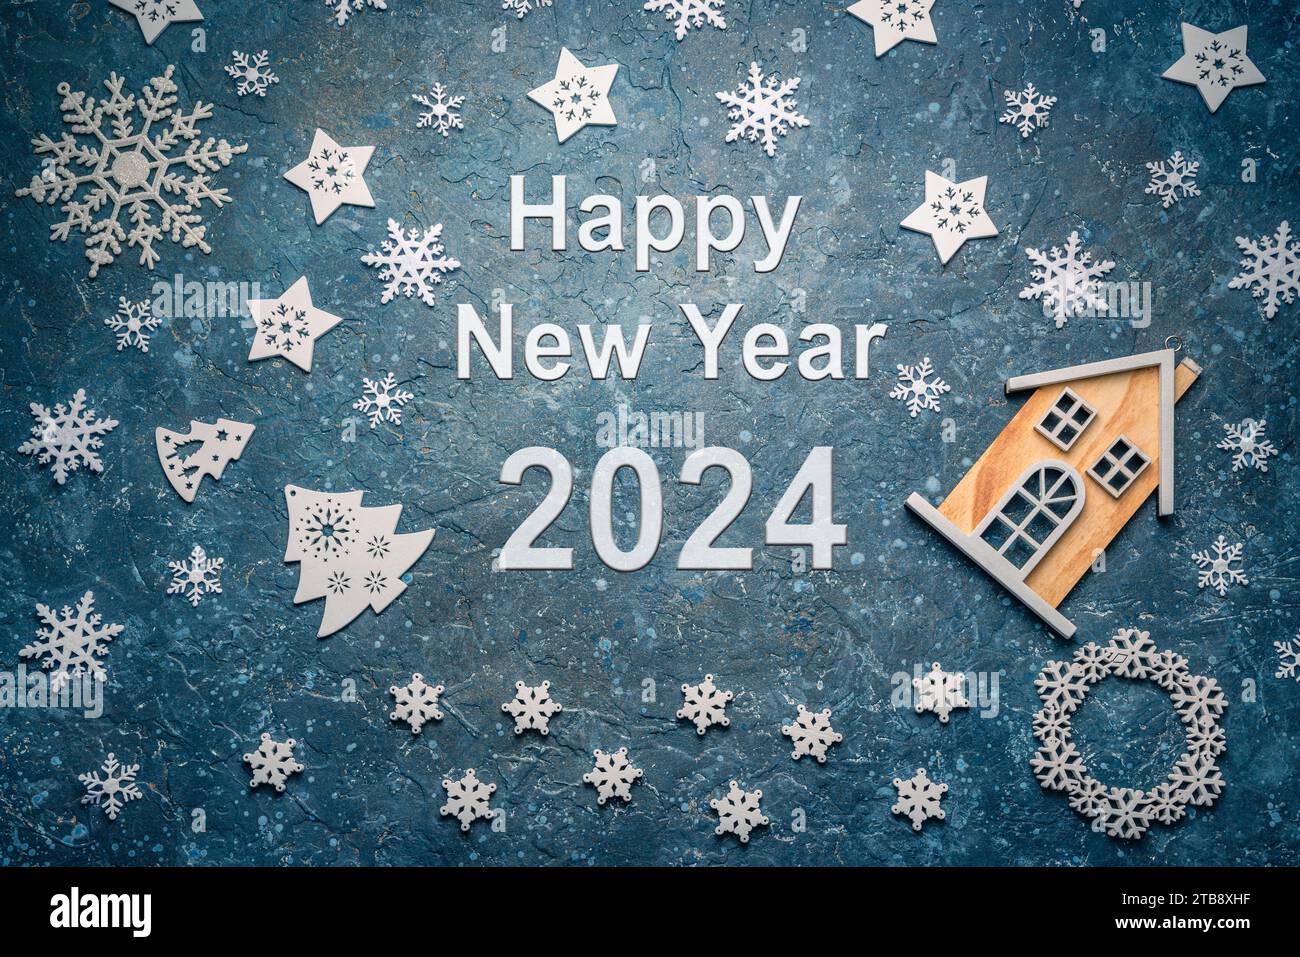 Happy new Year 2024 on a Christmas blue background with icing decoration Stock Photo